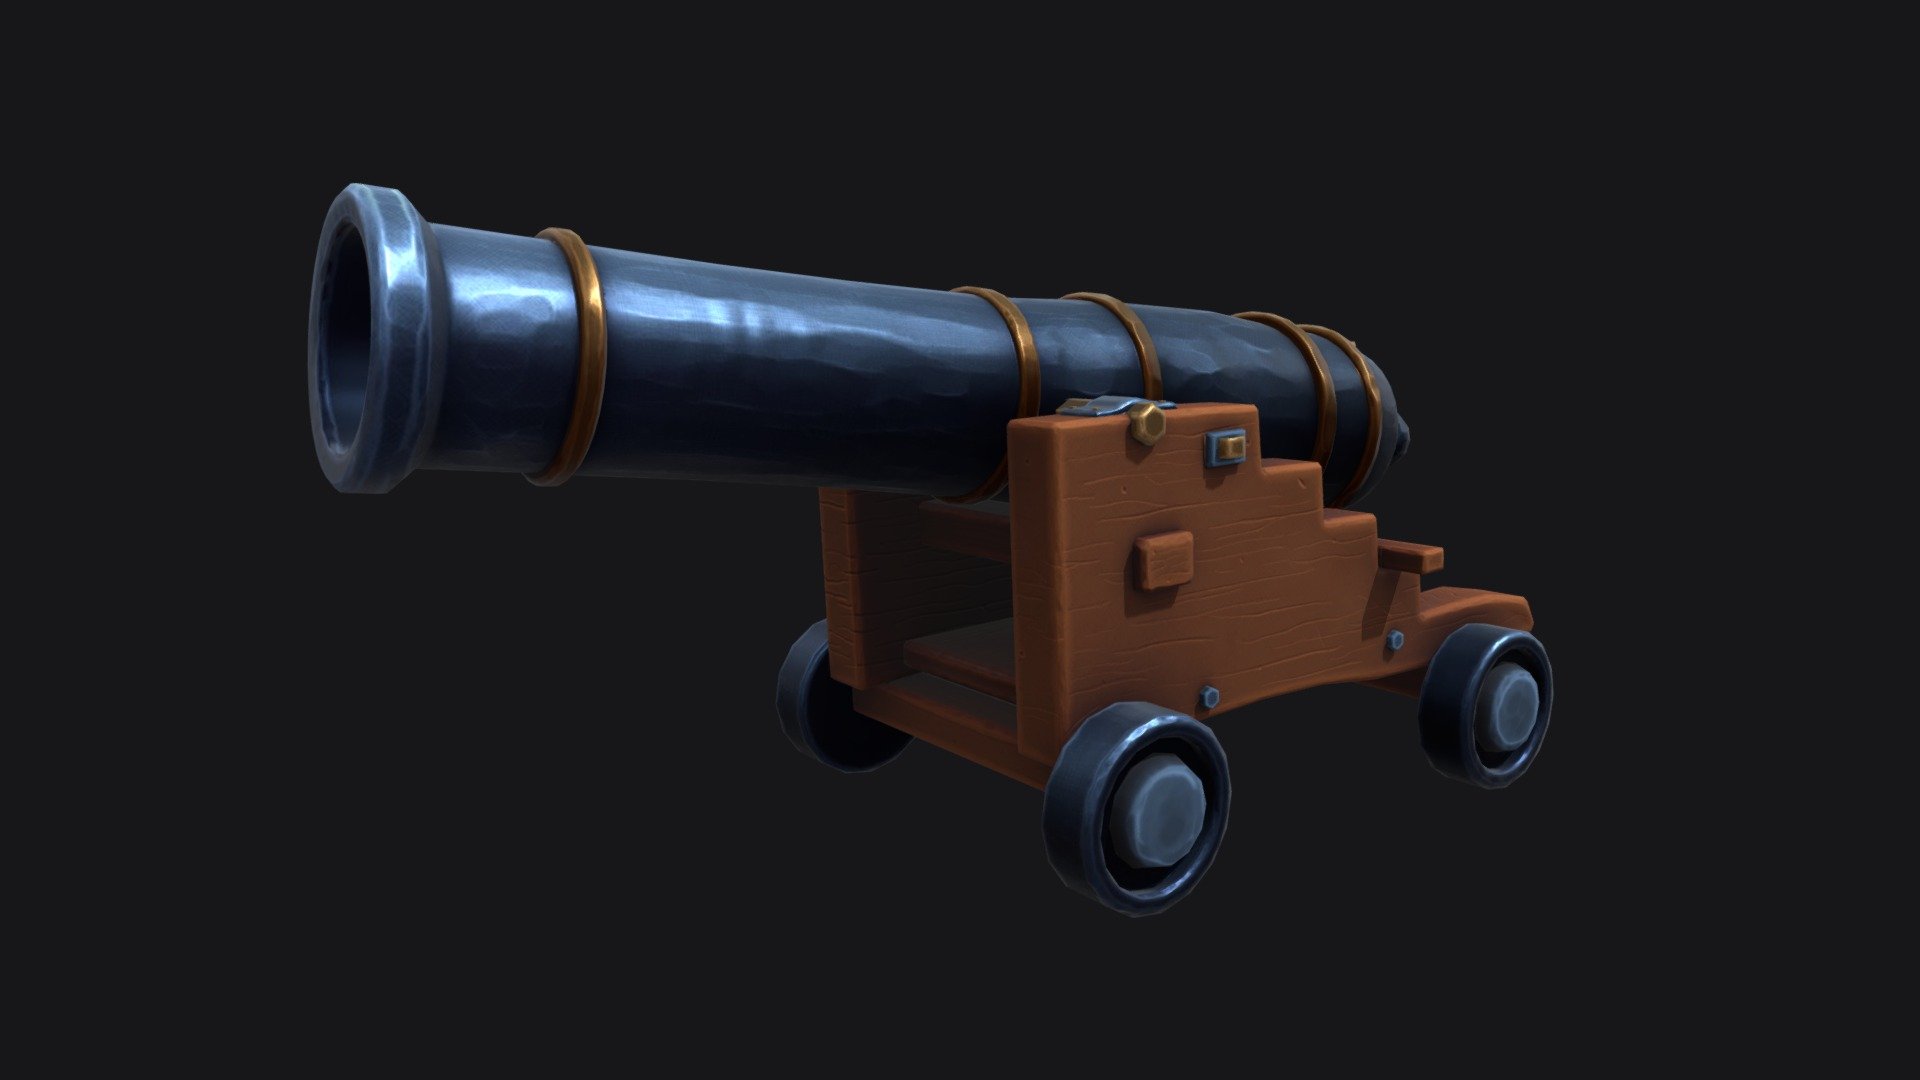 Stylized Low Poly Canon ready to implement in any game or project you may need!

Modeled and UVed in Blender, Sculpted in Zbrush, Baked in Marmoset and textures made in Substance Painter - Stylized Canon - Buy Royalty Free 3D model by AidanYB 3d model